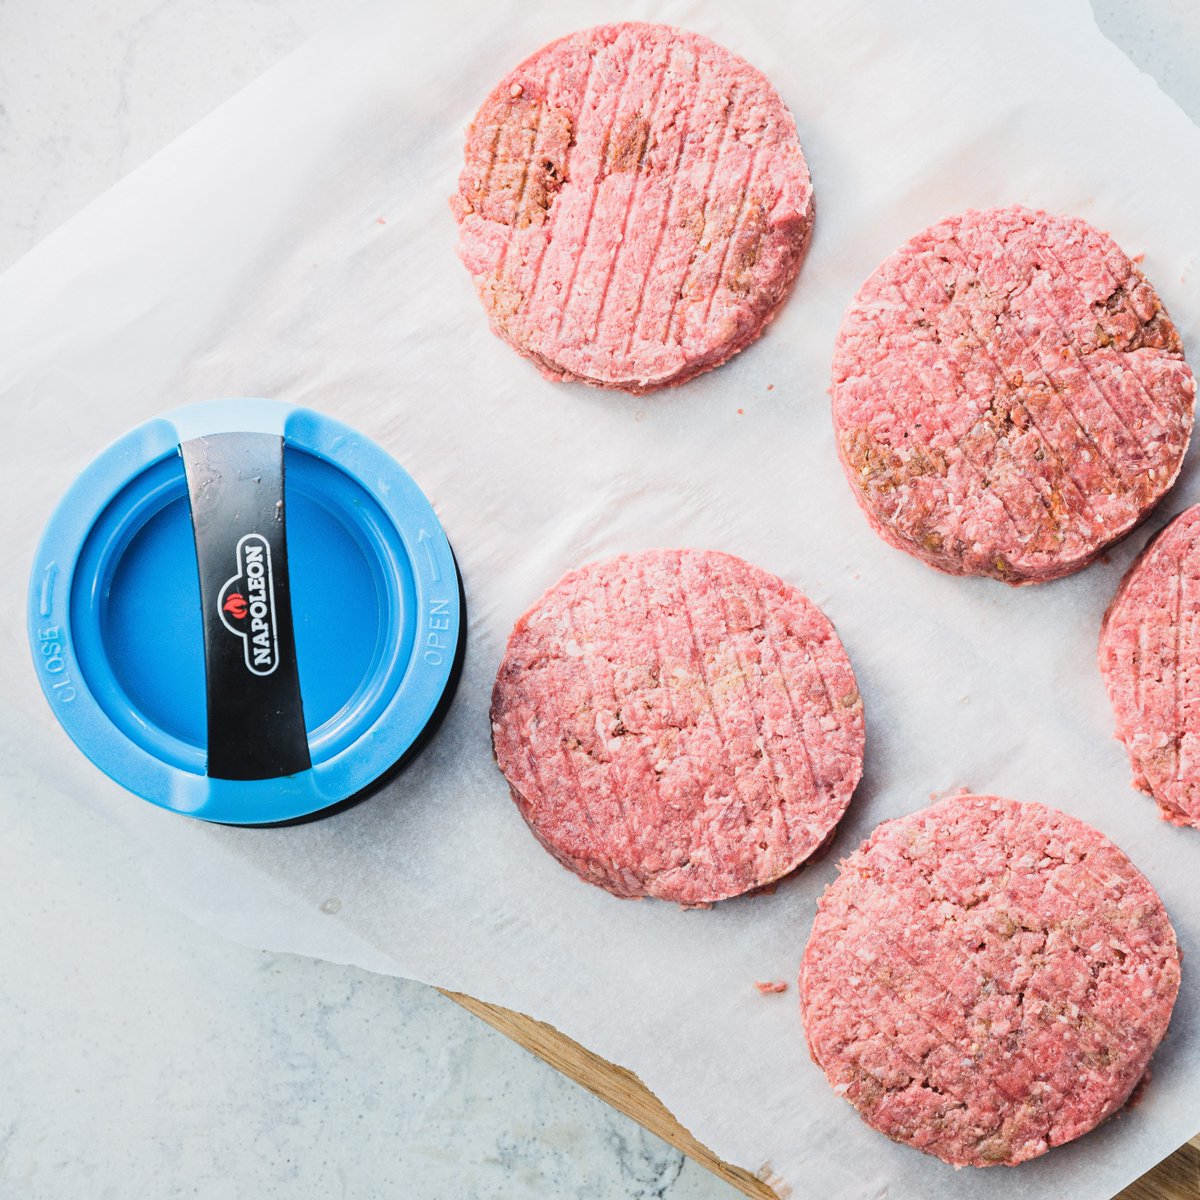 It's time to celebrate National Hamburger Day!  Craft the perfect patties with ease using the Napoleon Burger Press Kit. Available in-store & online, it's your secret weapon for burger perfection.

napoleonhomecomfort.ca/products/70060…

#NationalHamburgerDay #GrillMasters #NapoleonBurgerPress